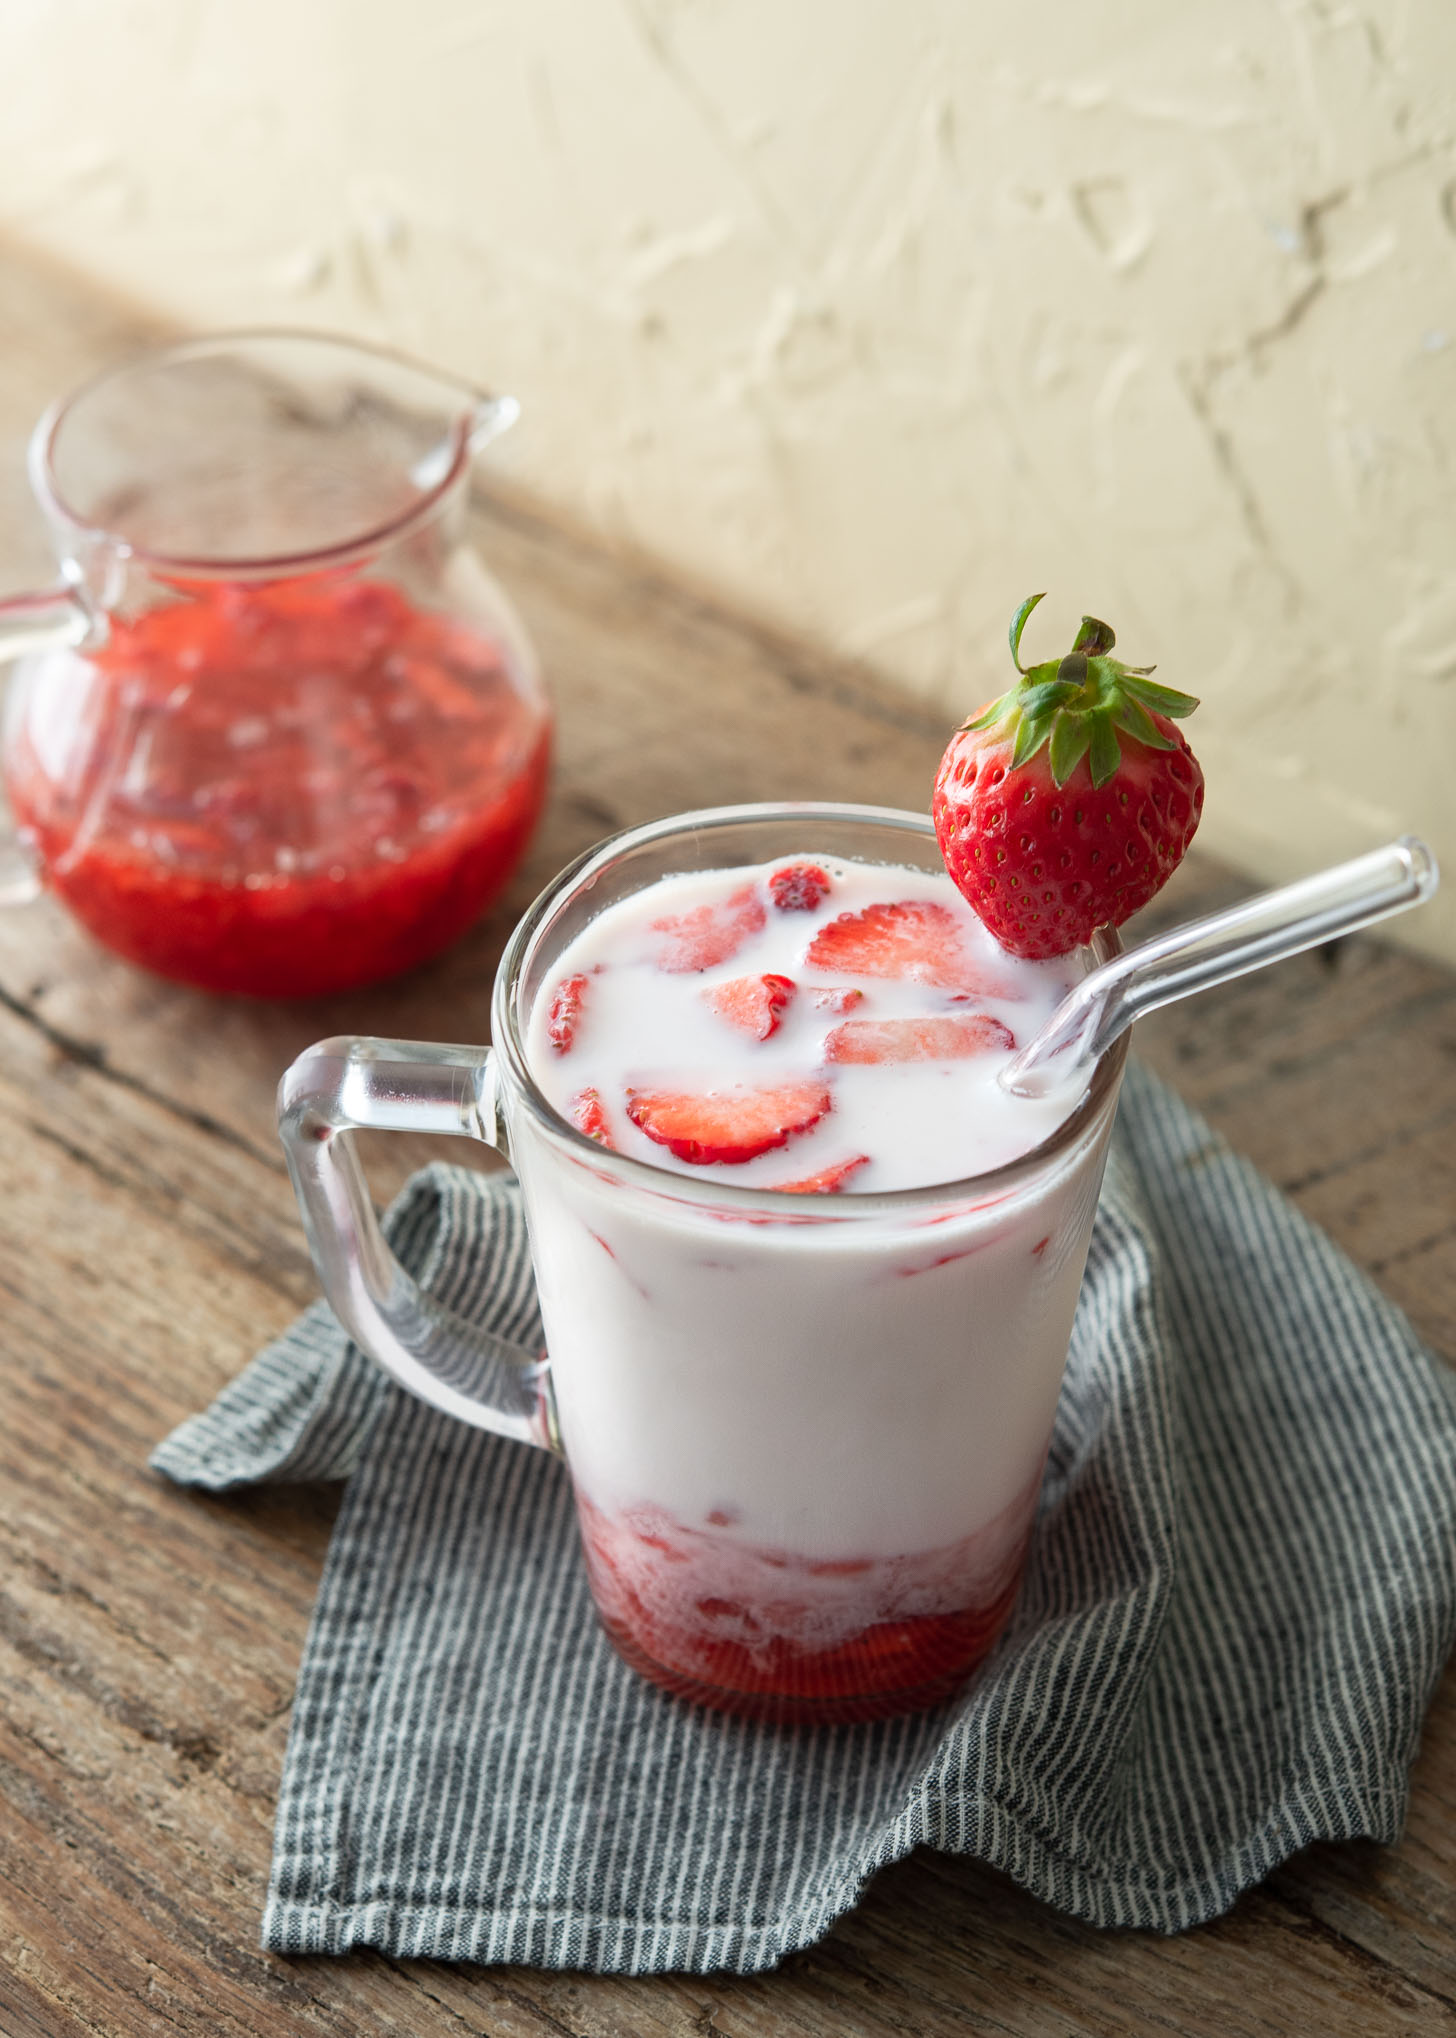 Korean strawberry milk presented in a glass cup garnished with fresh strawberries.